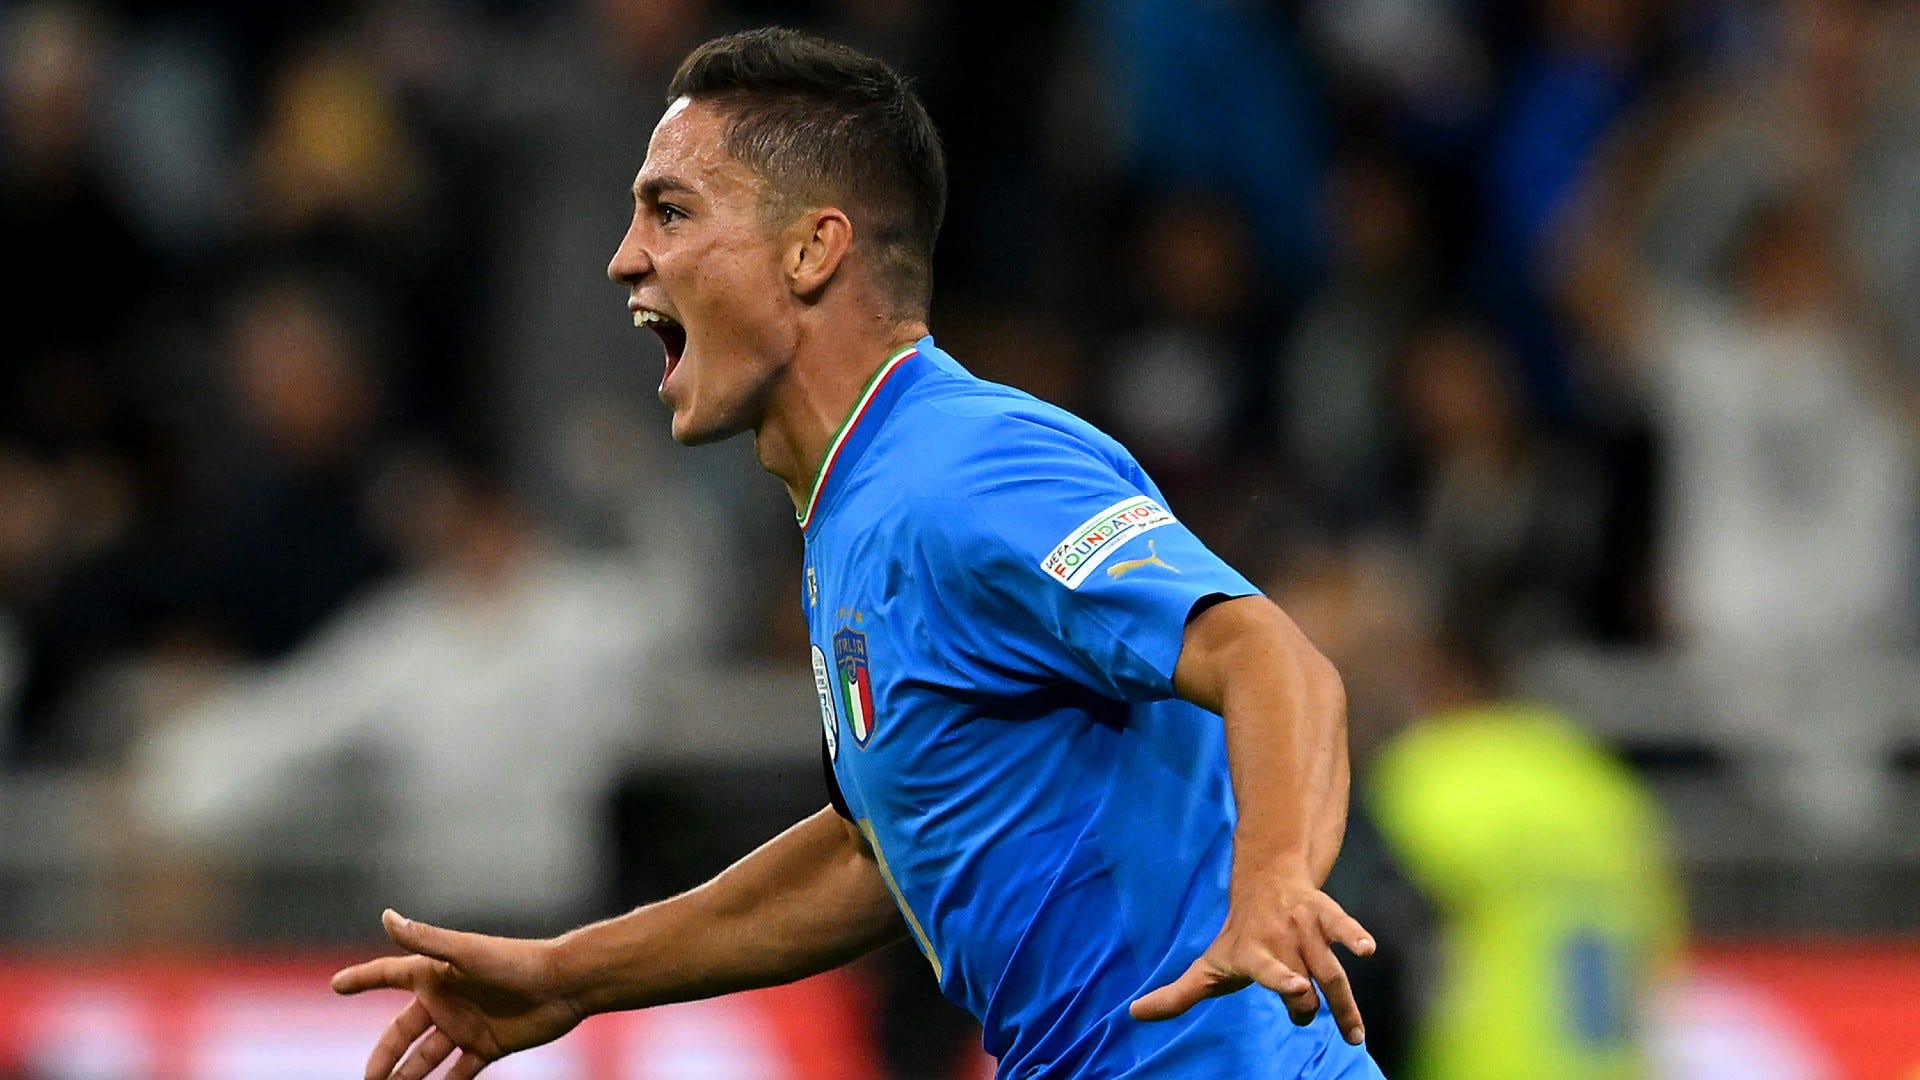 Hungary vs Italy Live stream, TV channel, kick-off time and how to watch Goal US